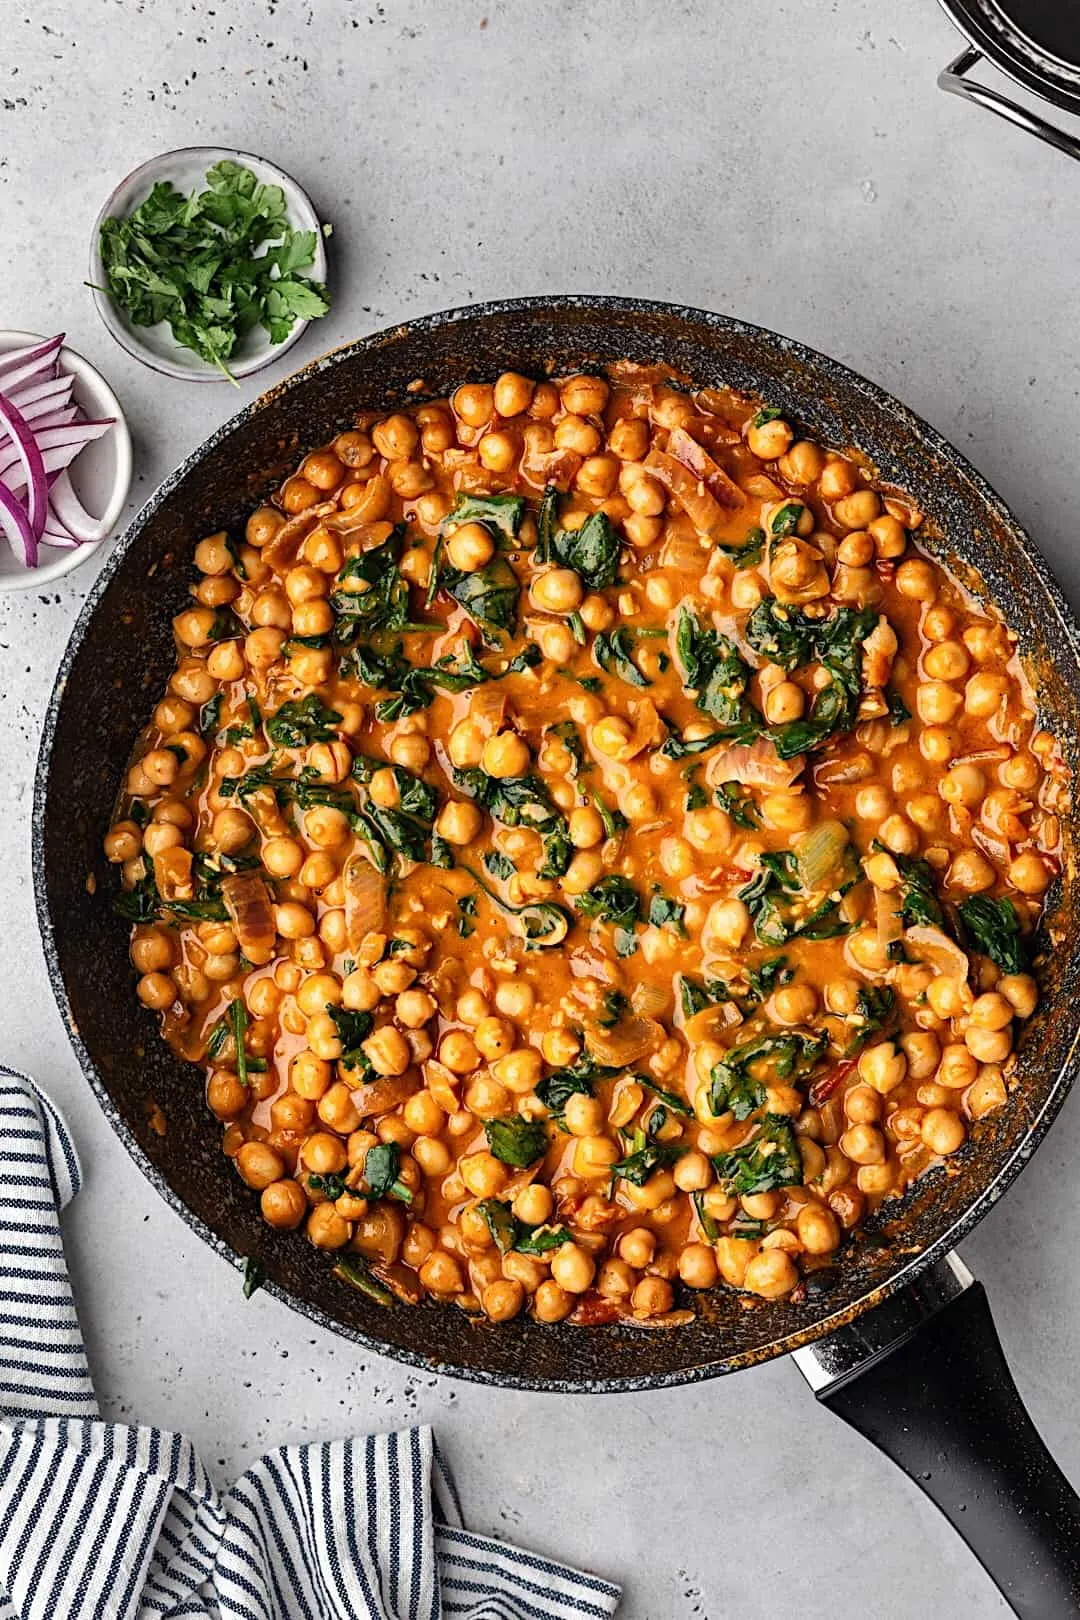 Chickpea and Spinach Curry in Saucepan #vegan #curry #food #recipe #chickpea #spinach #creamy